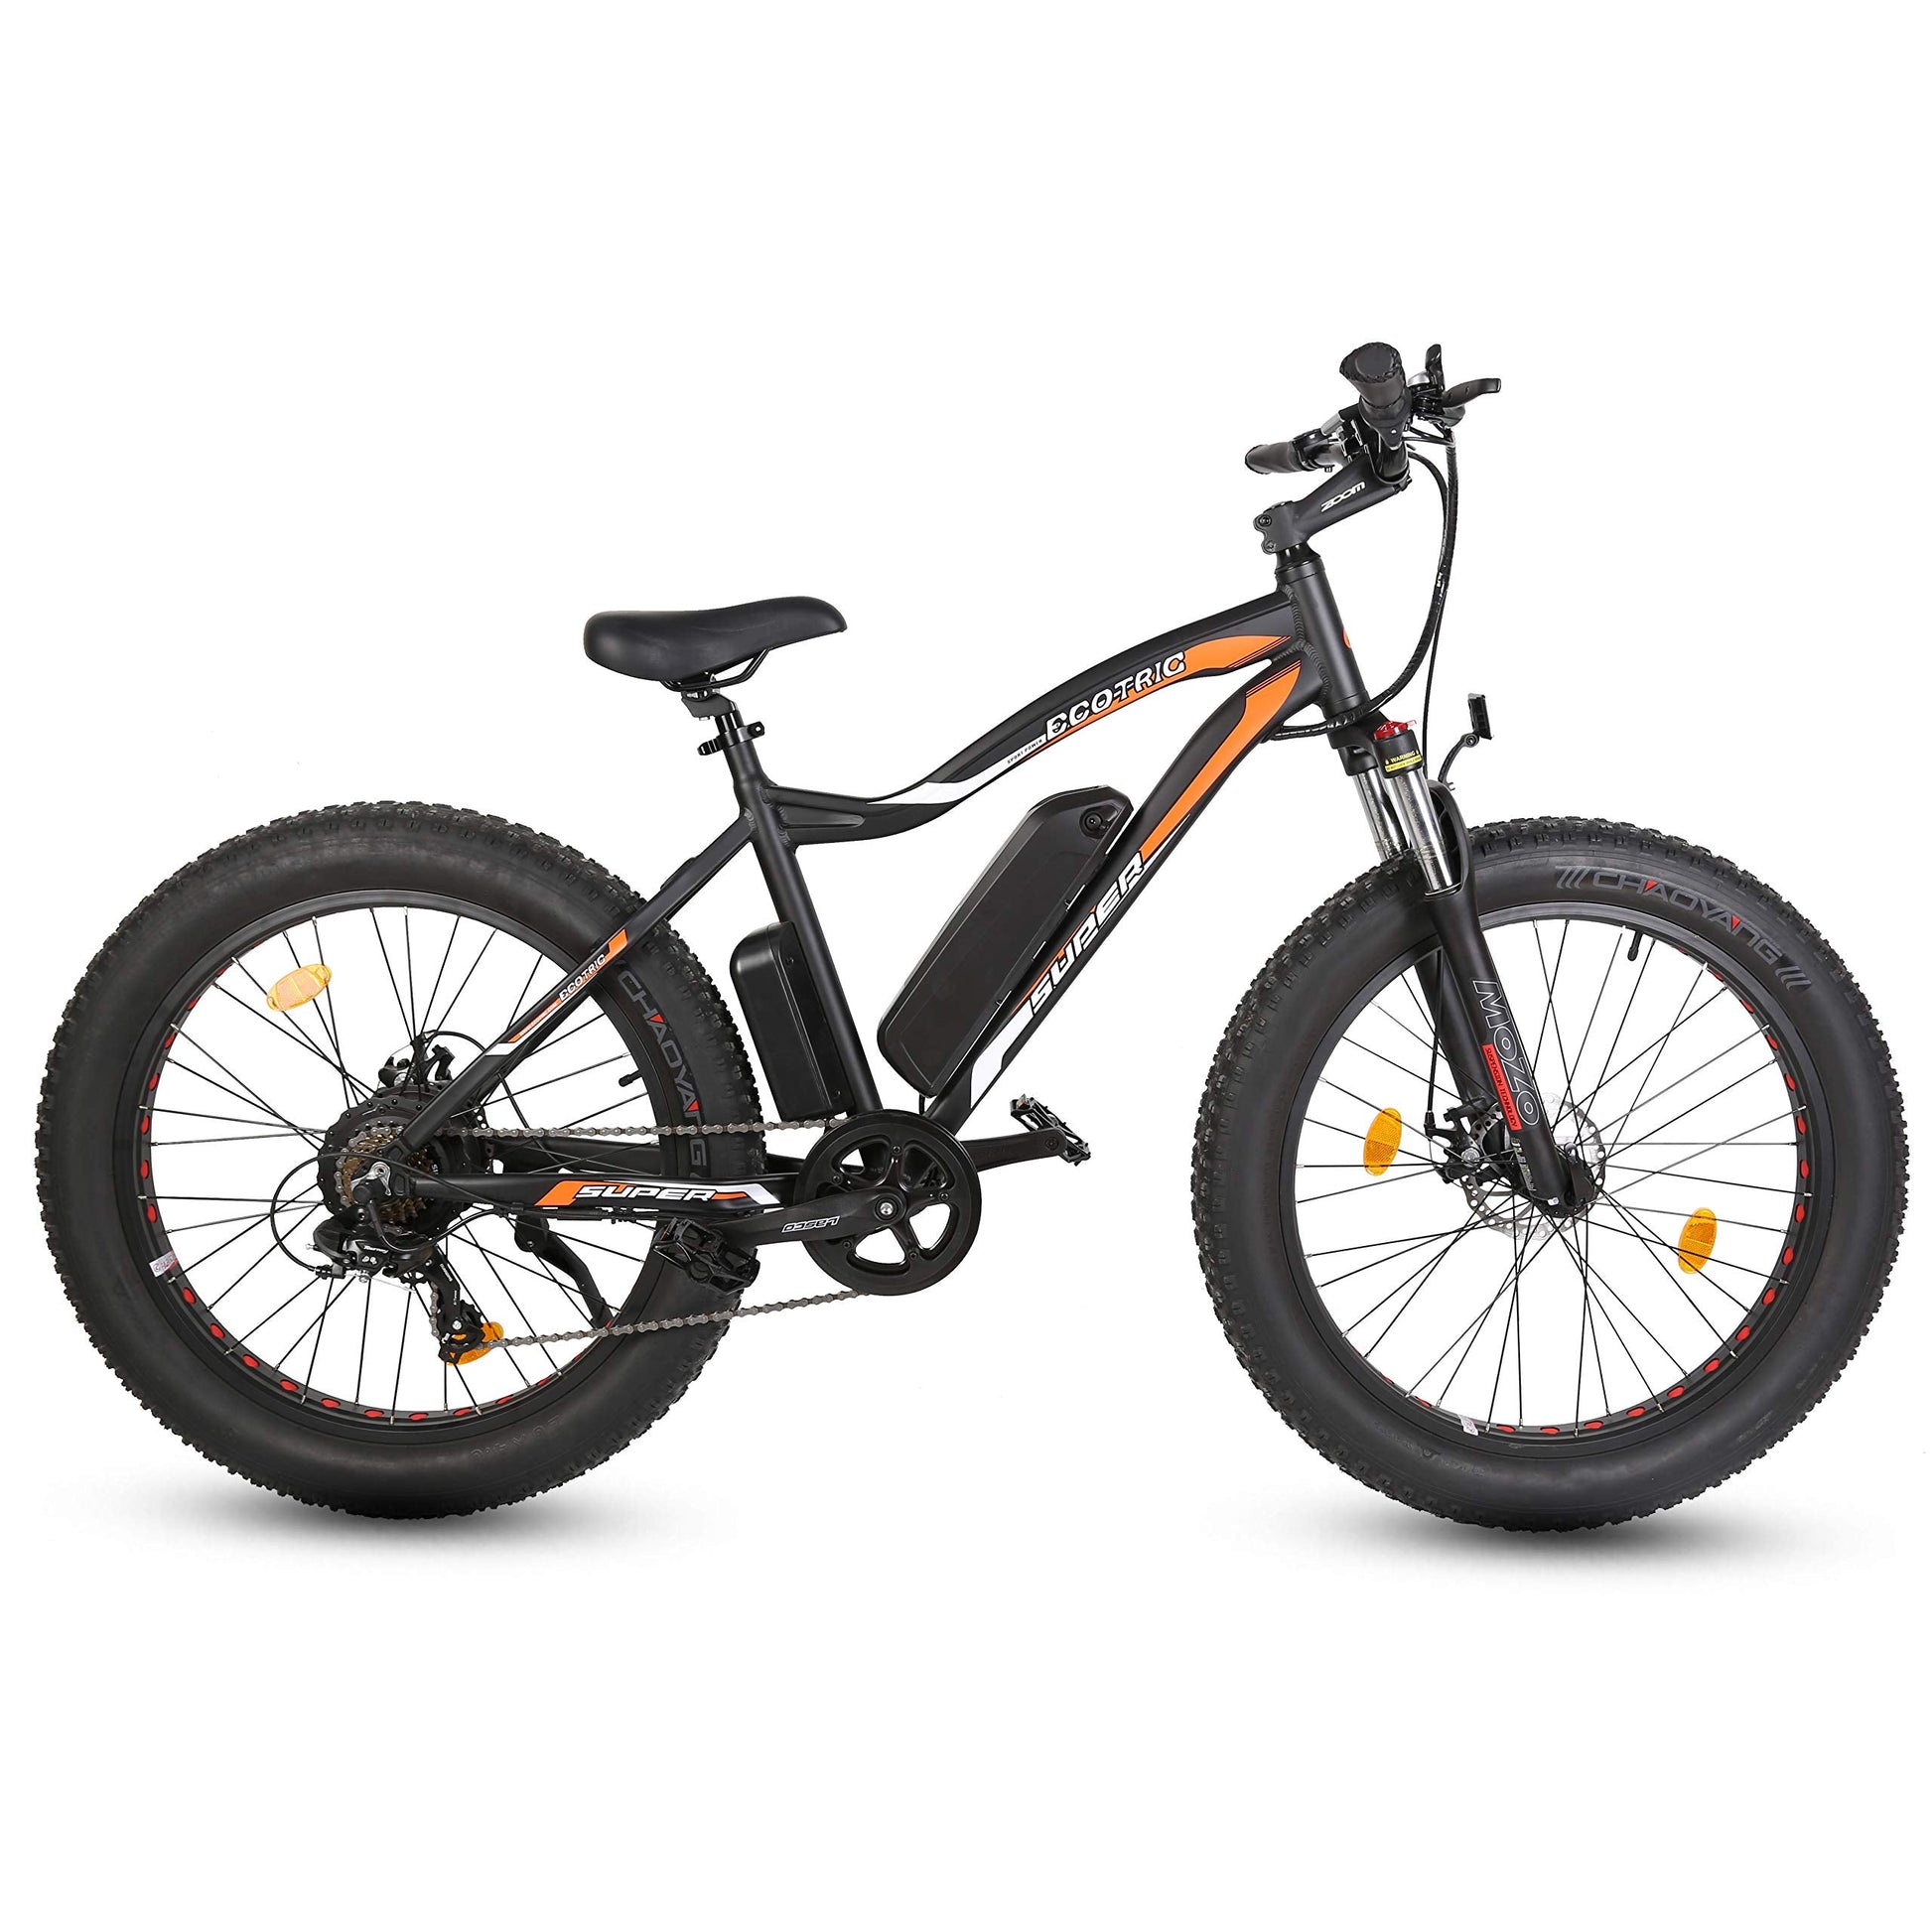 ECOTRIC 26”Powerful Fat Tire Electric Bike 500W Motor 36V/12.5 AH Removable Lithium Battery Ebike Beach Snow Mountain Bicycle Shock Absorption (Black) - UL Certified | Decor Gifts and More